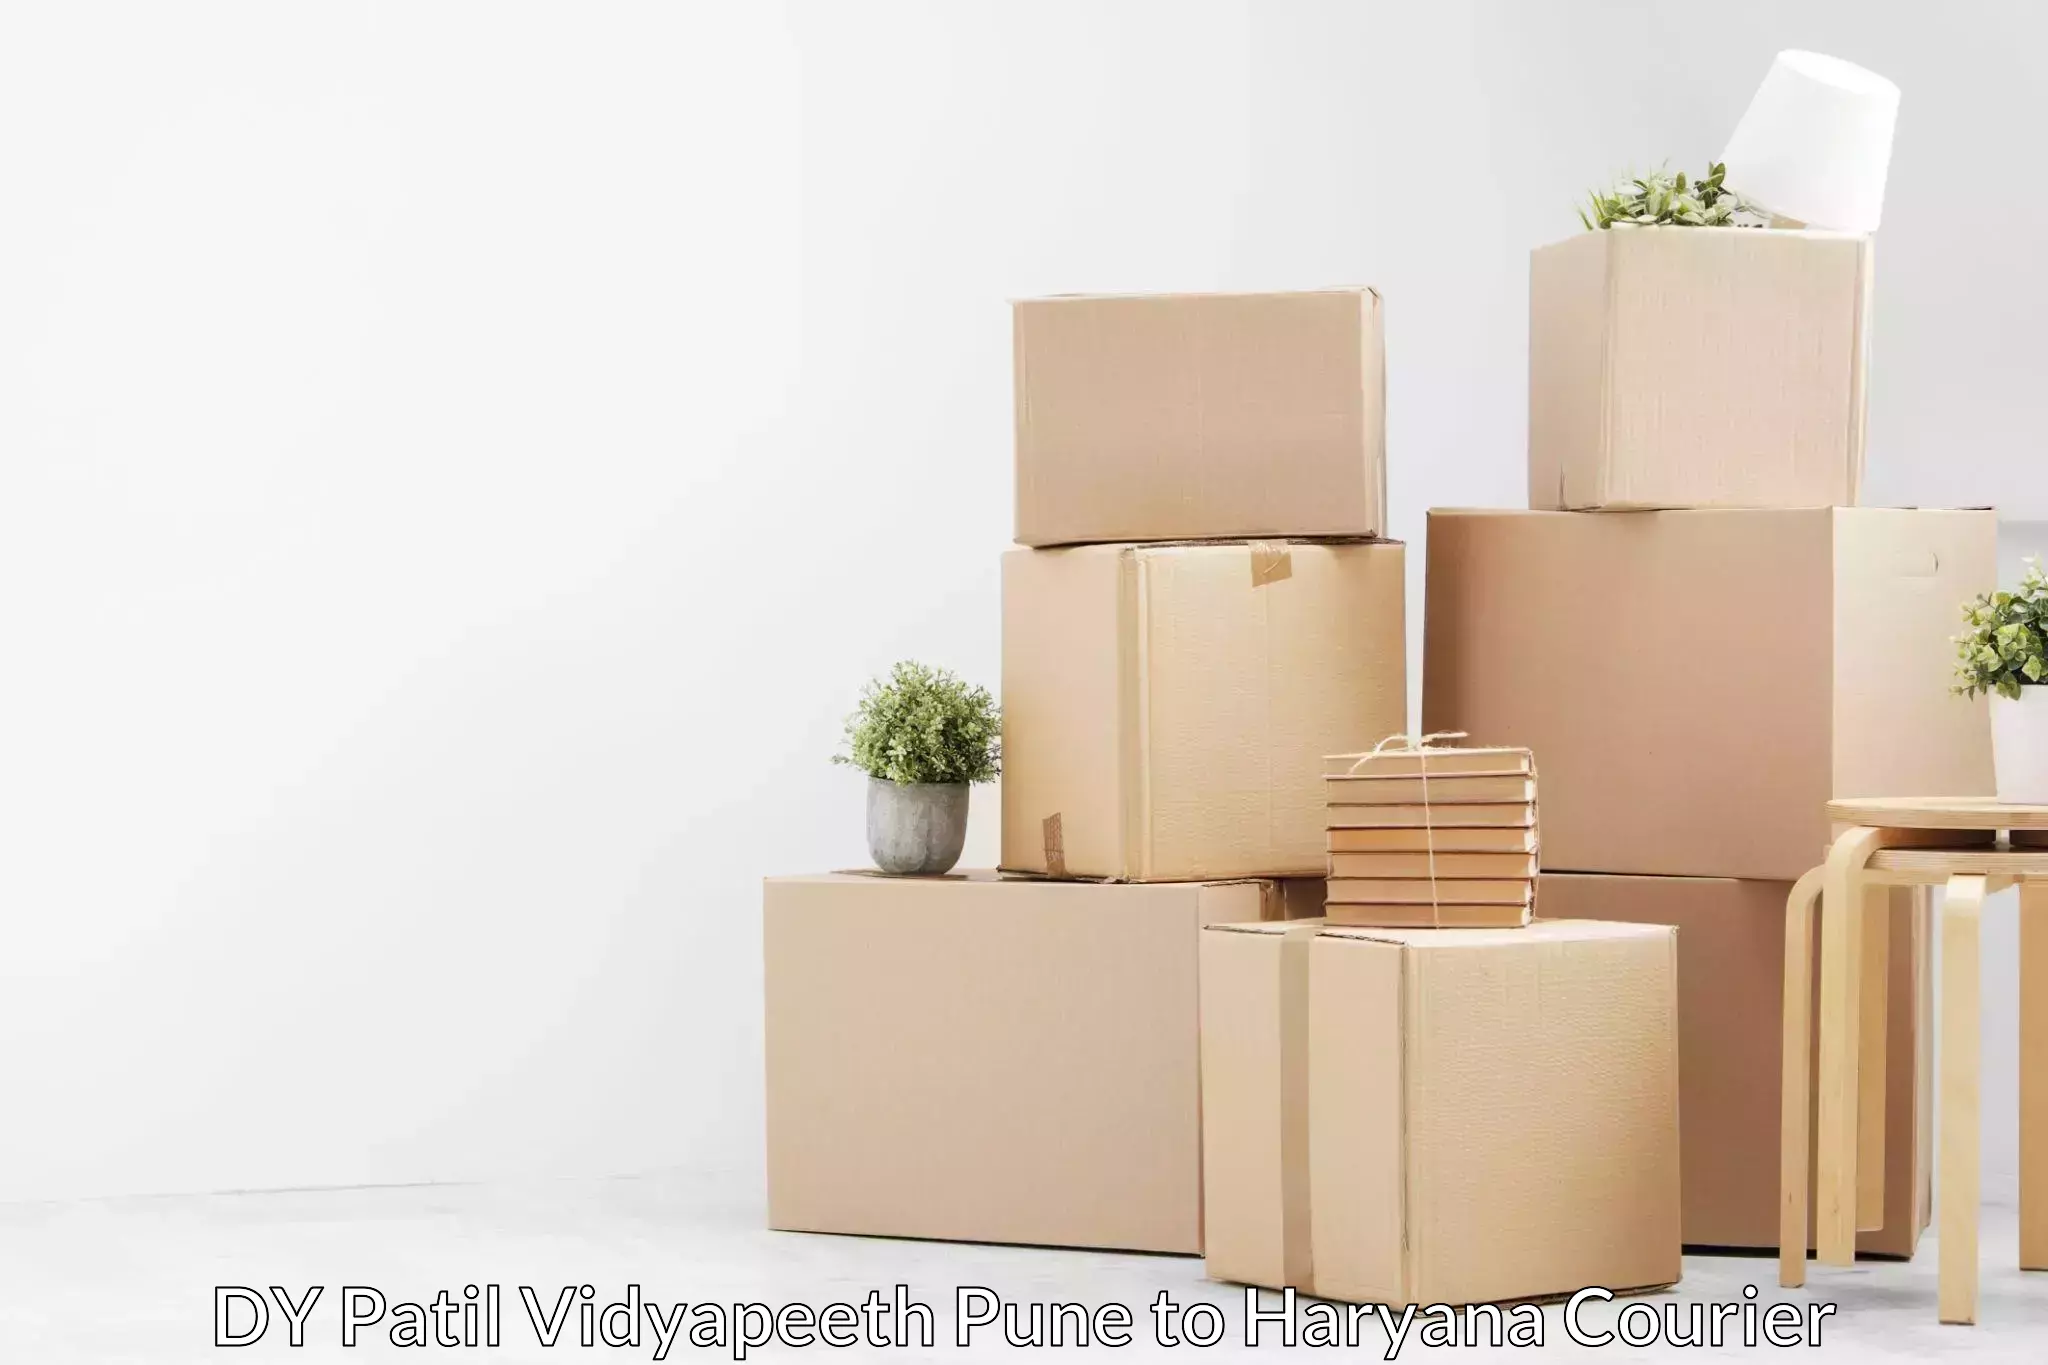 Professional home shifting in DY Patil Vidyapeeth Pune to Julana